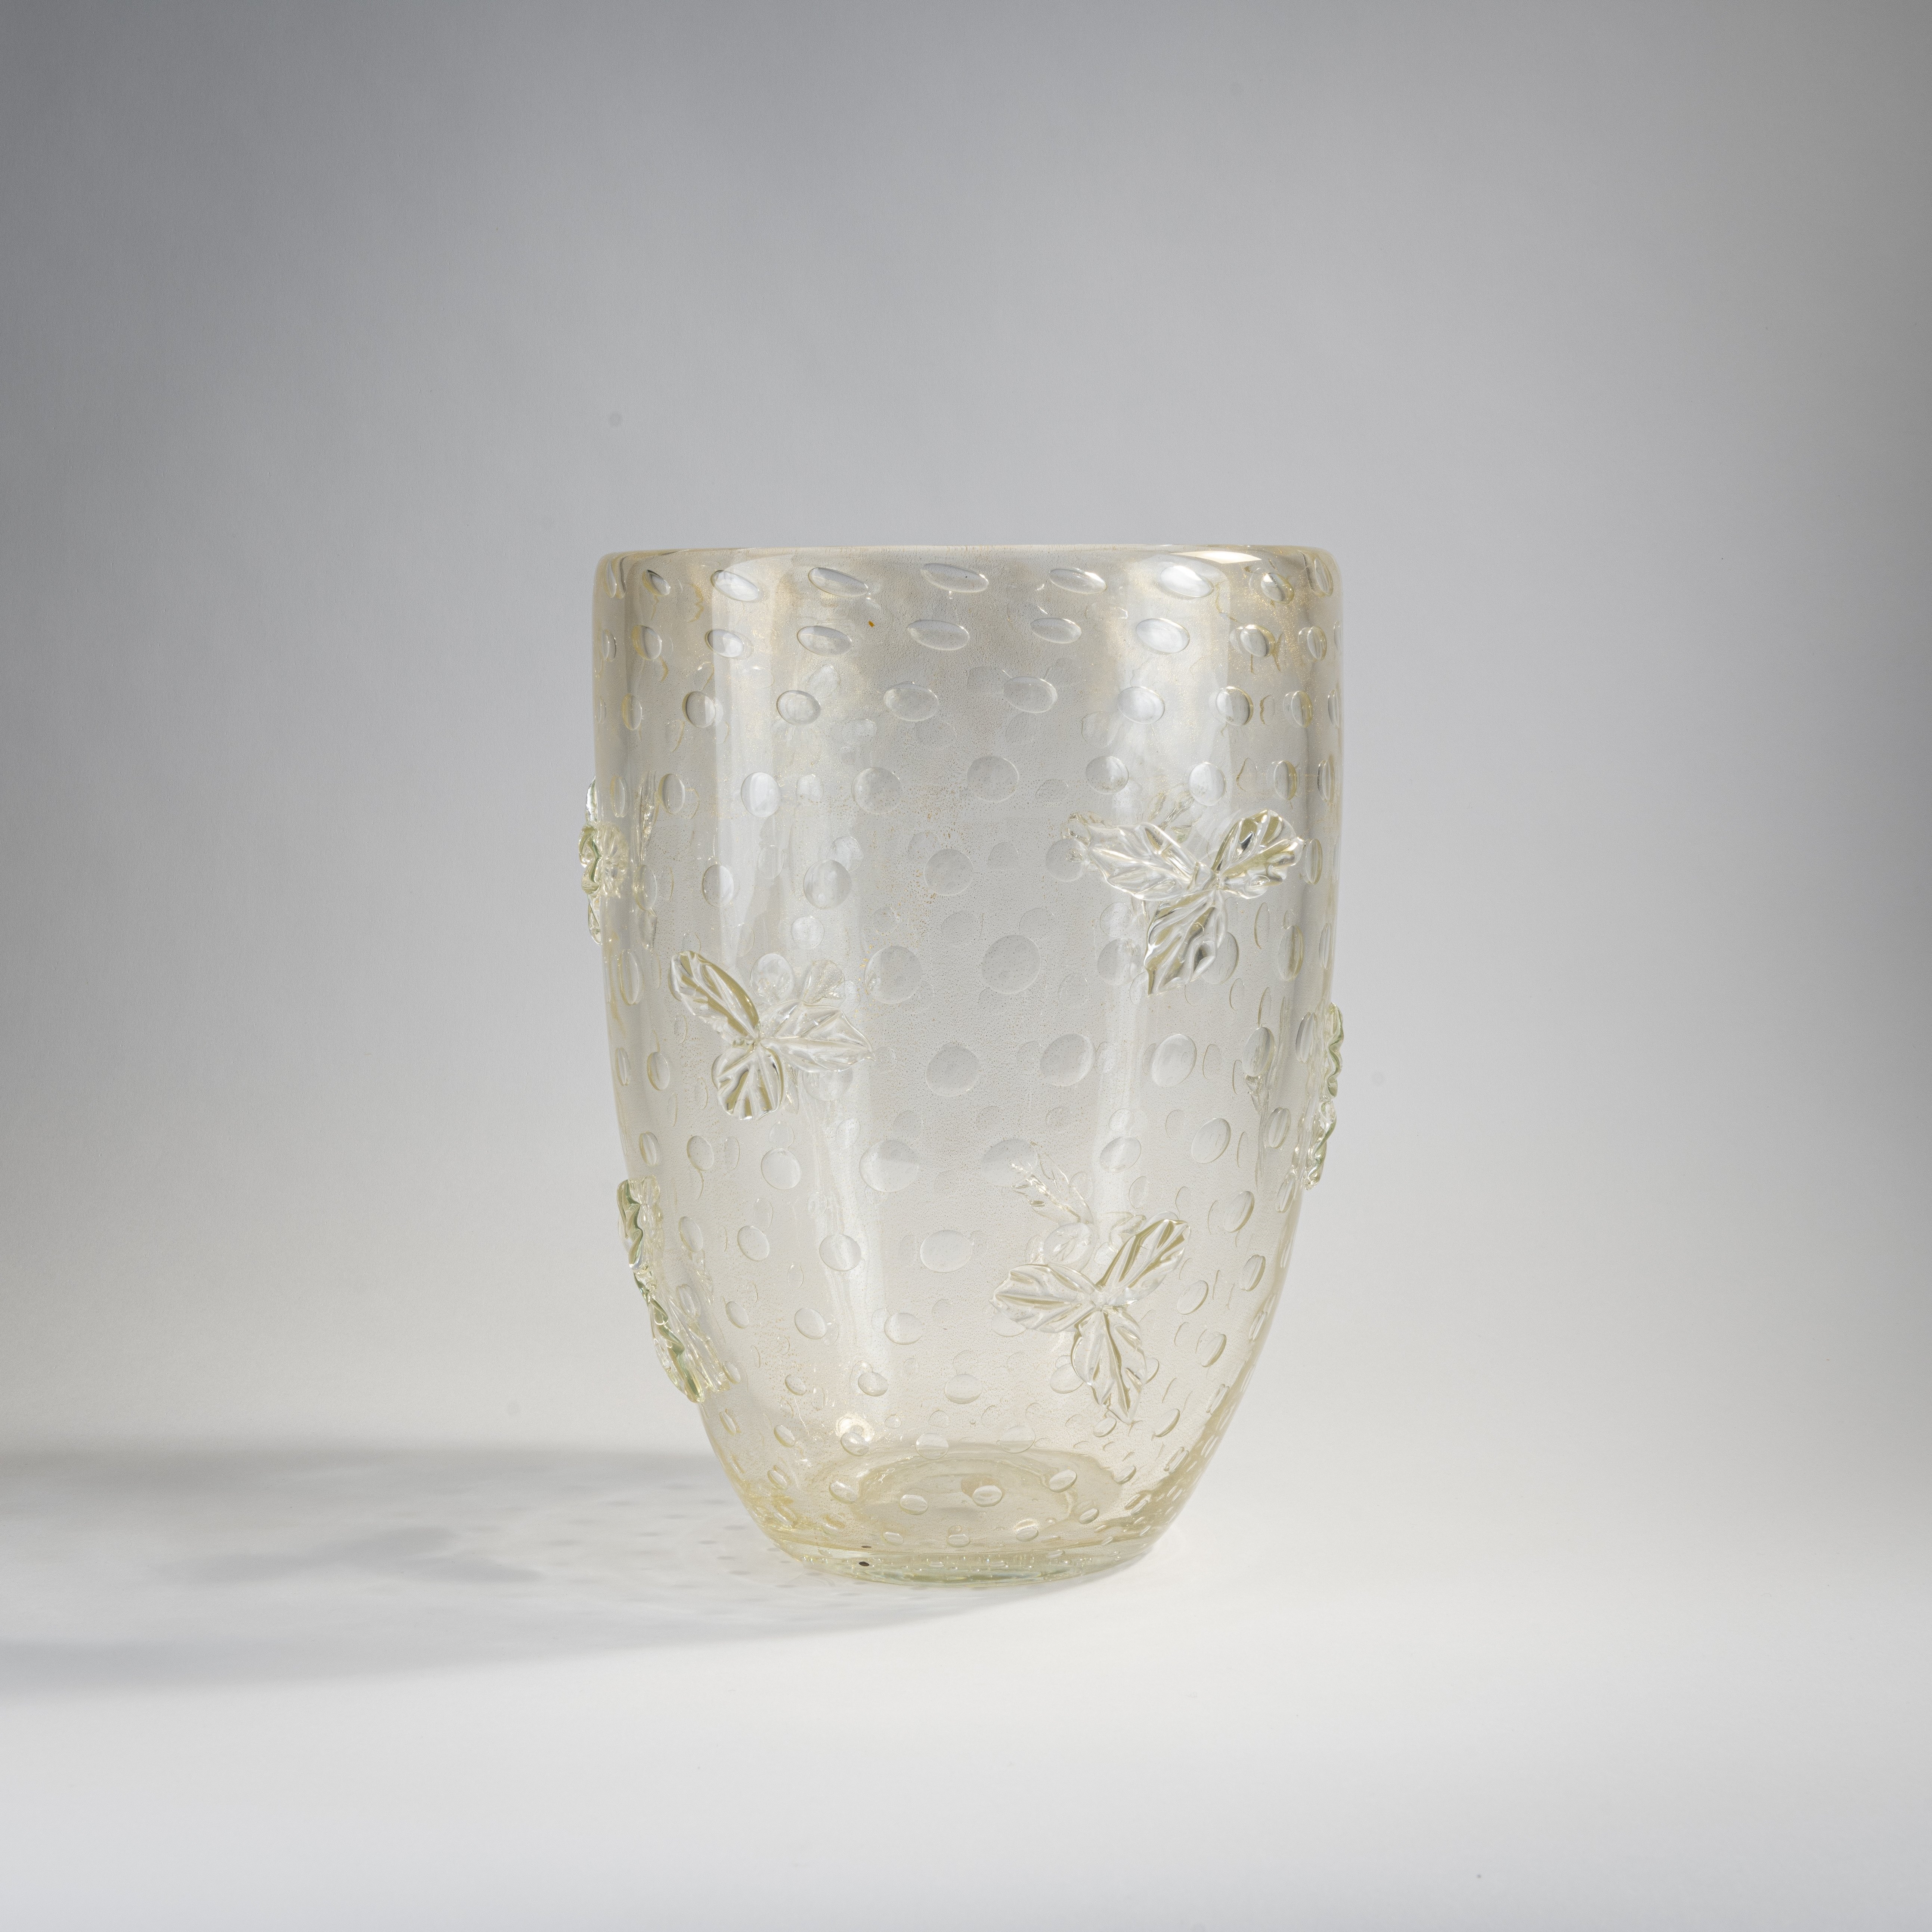 Vase with applied leaves